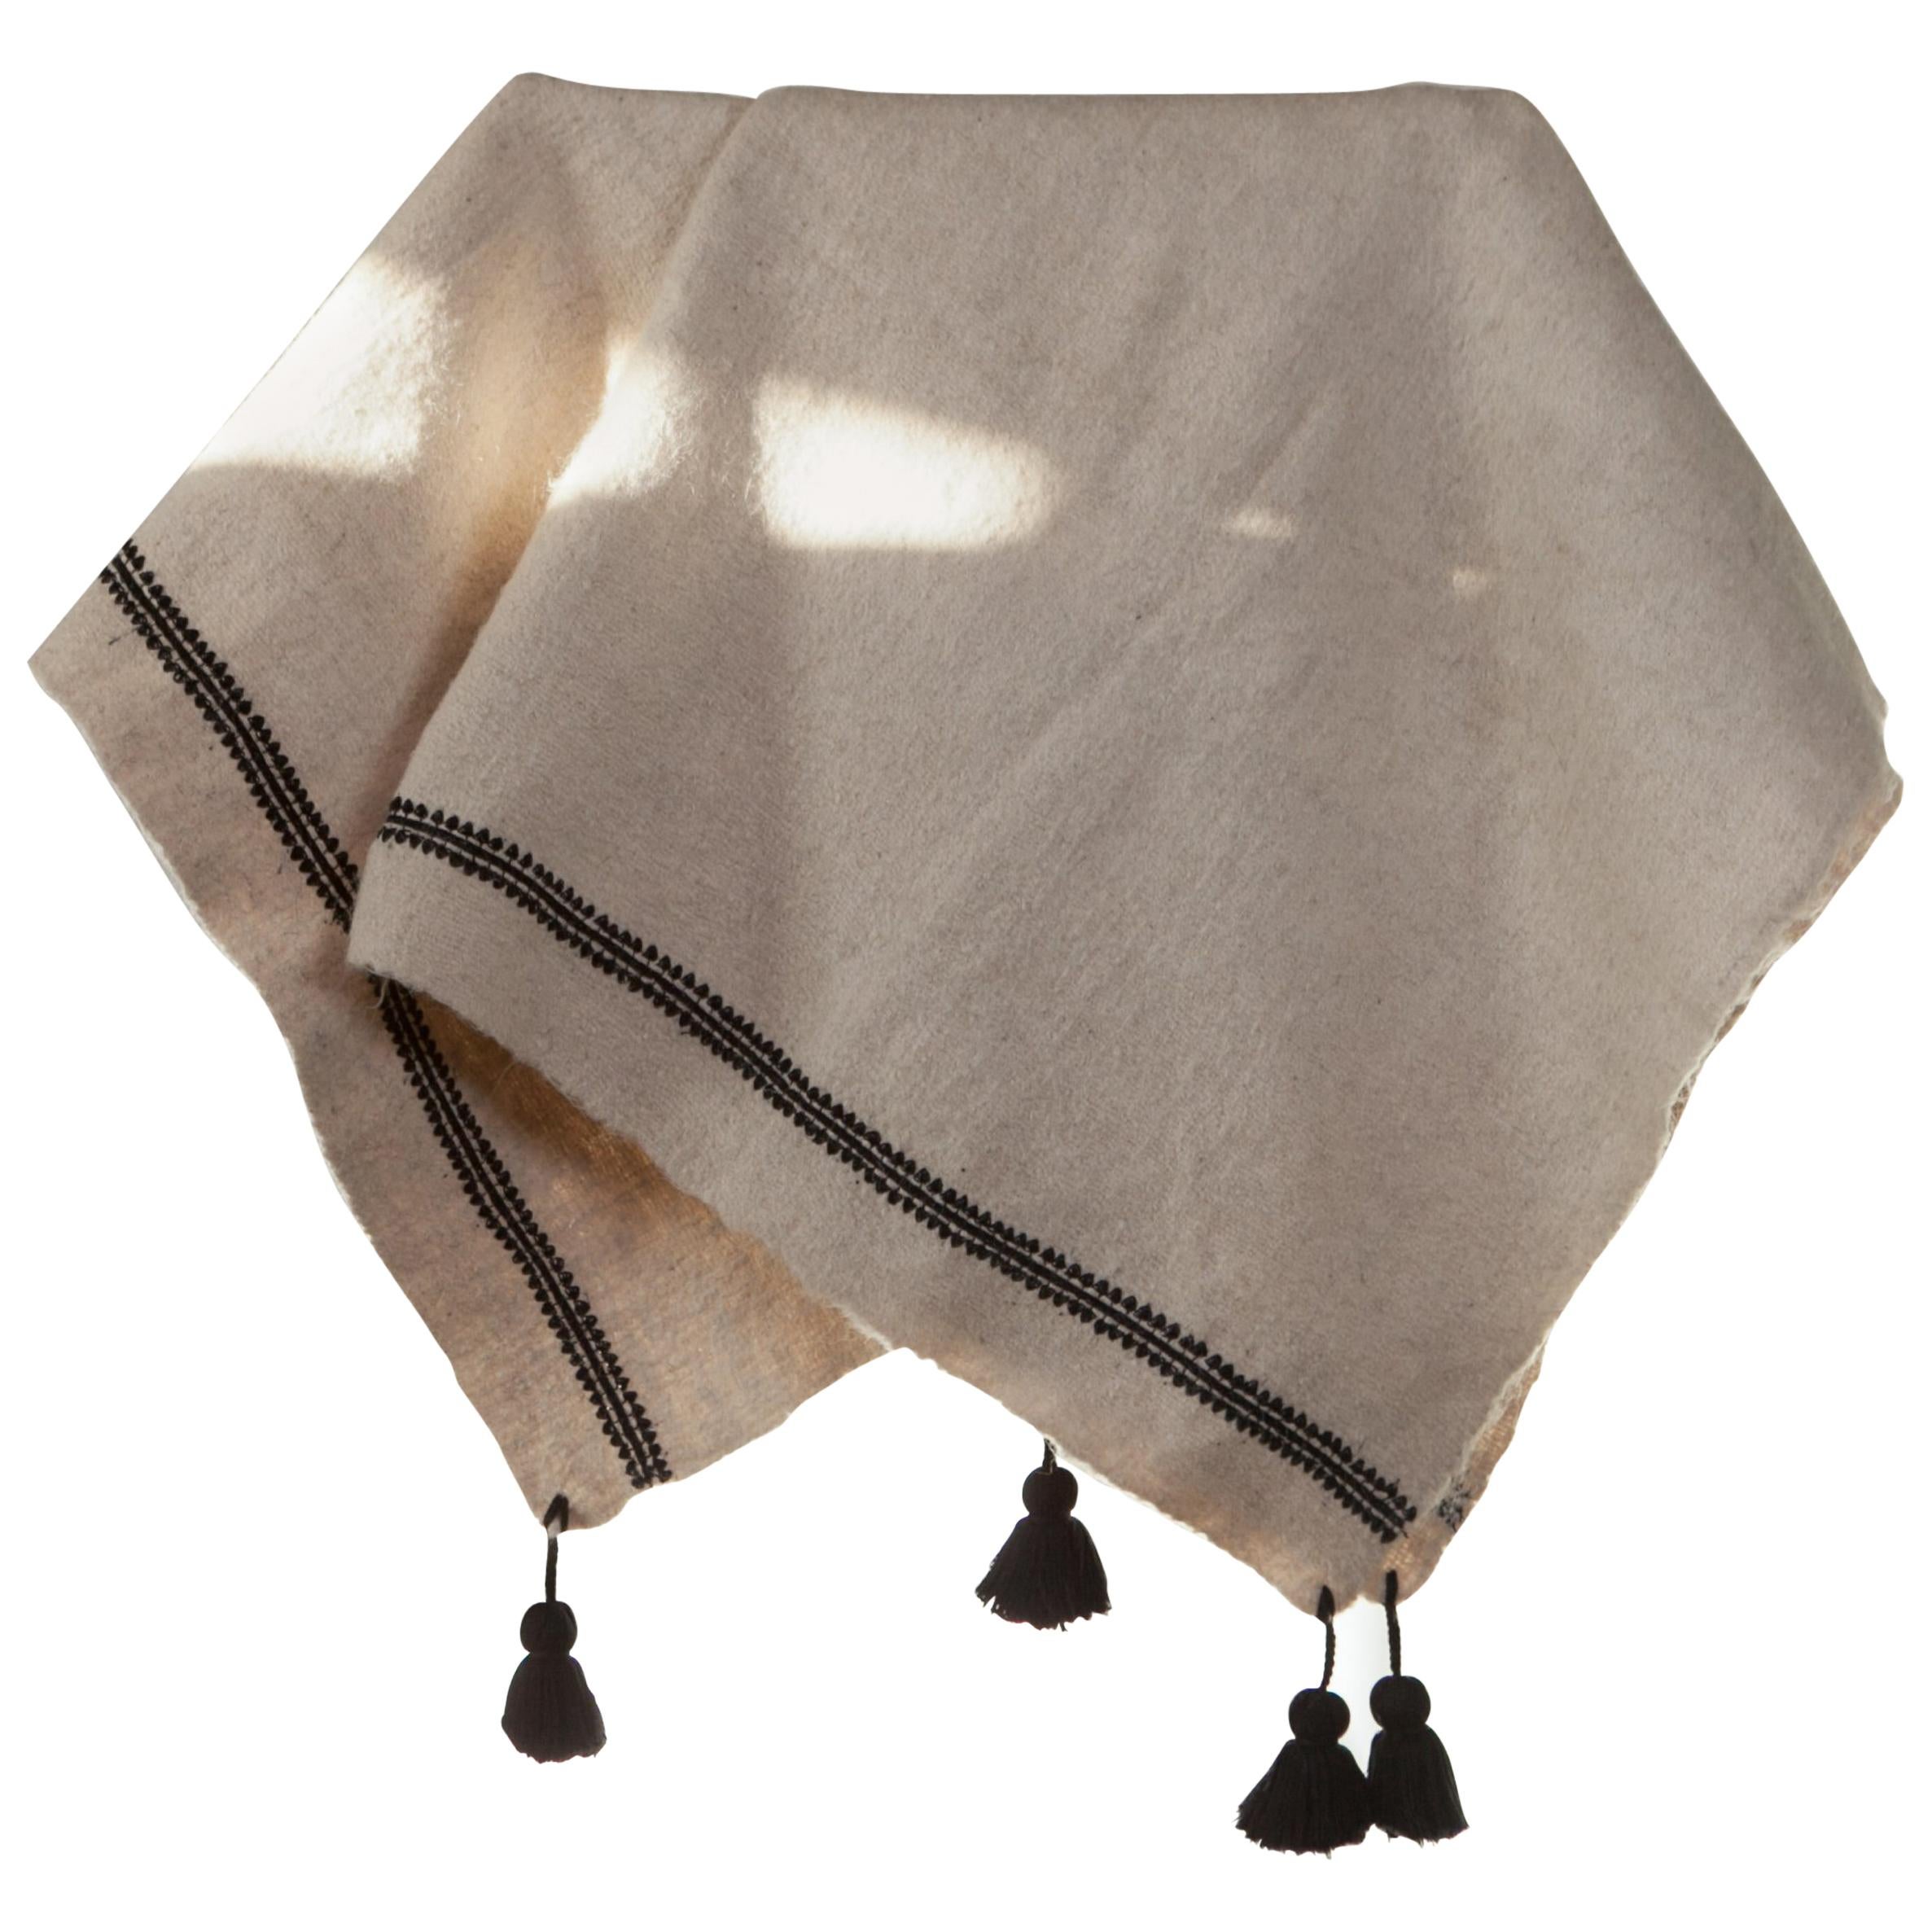 One of a Kind Handwoven Wool Throw in Natural with Black Tassels, in Stock